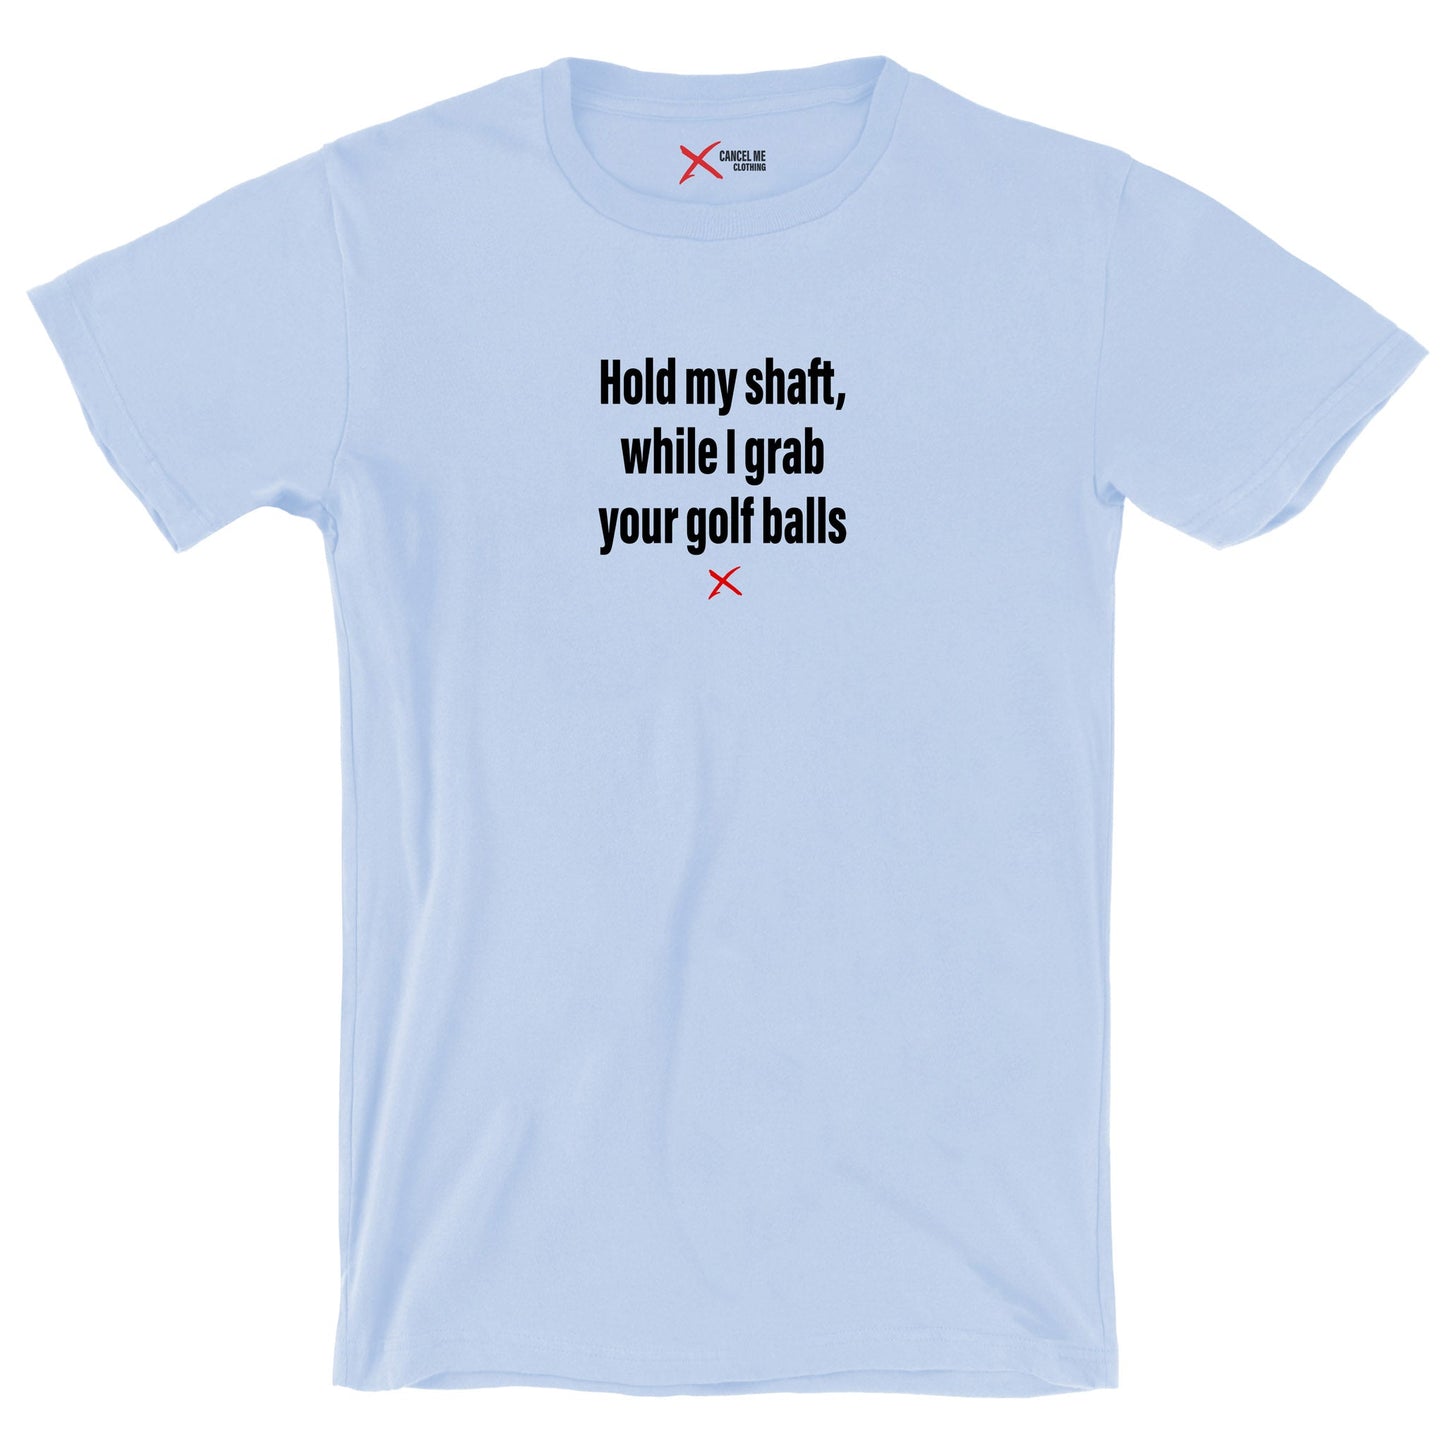 Hold my shaft, while I grab your golf balls - Shirt